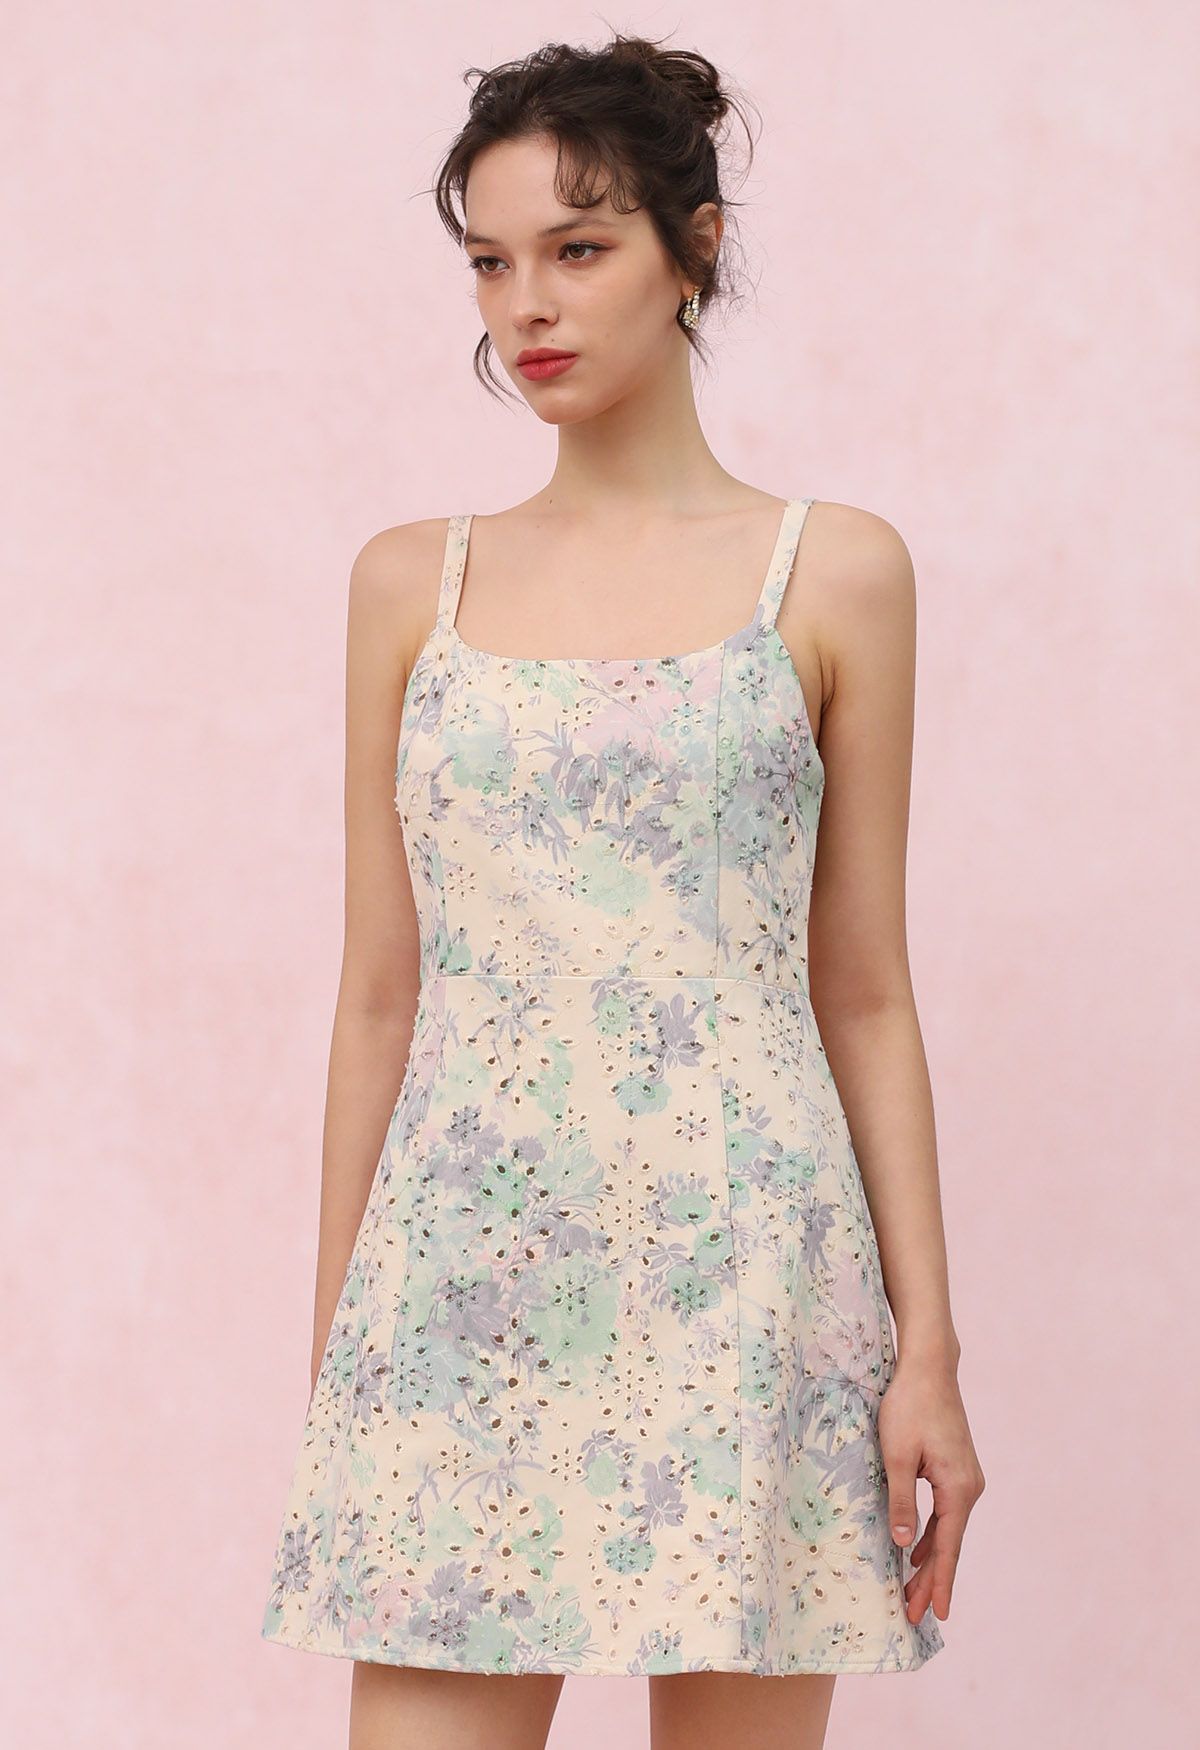 Rose Printed Eyelet Embroidered Cami Denim Dress in Lavender - Retro, Indie  and Unique Fashion